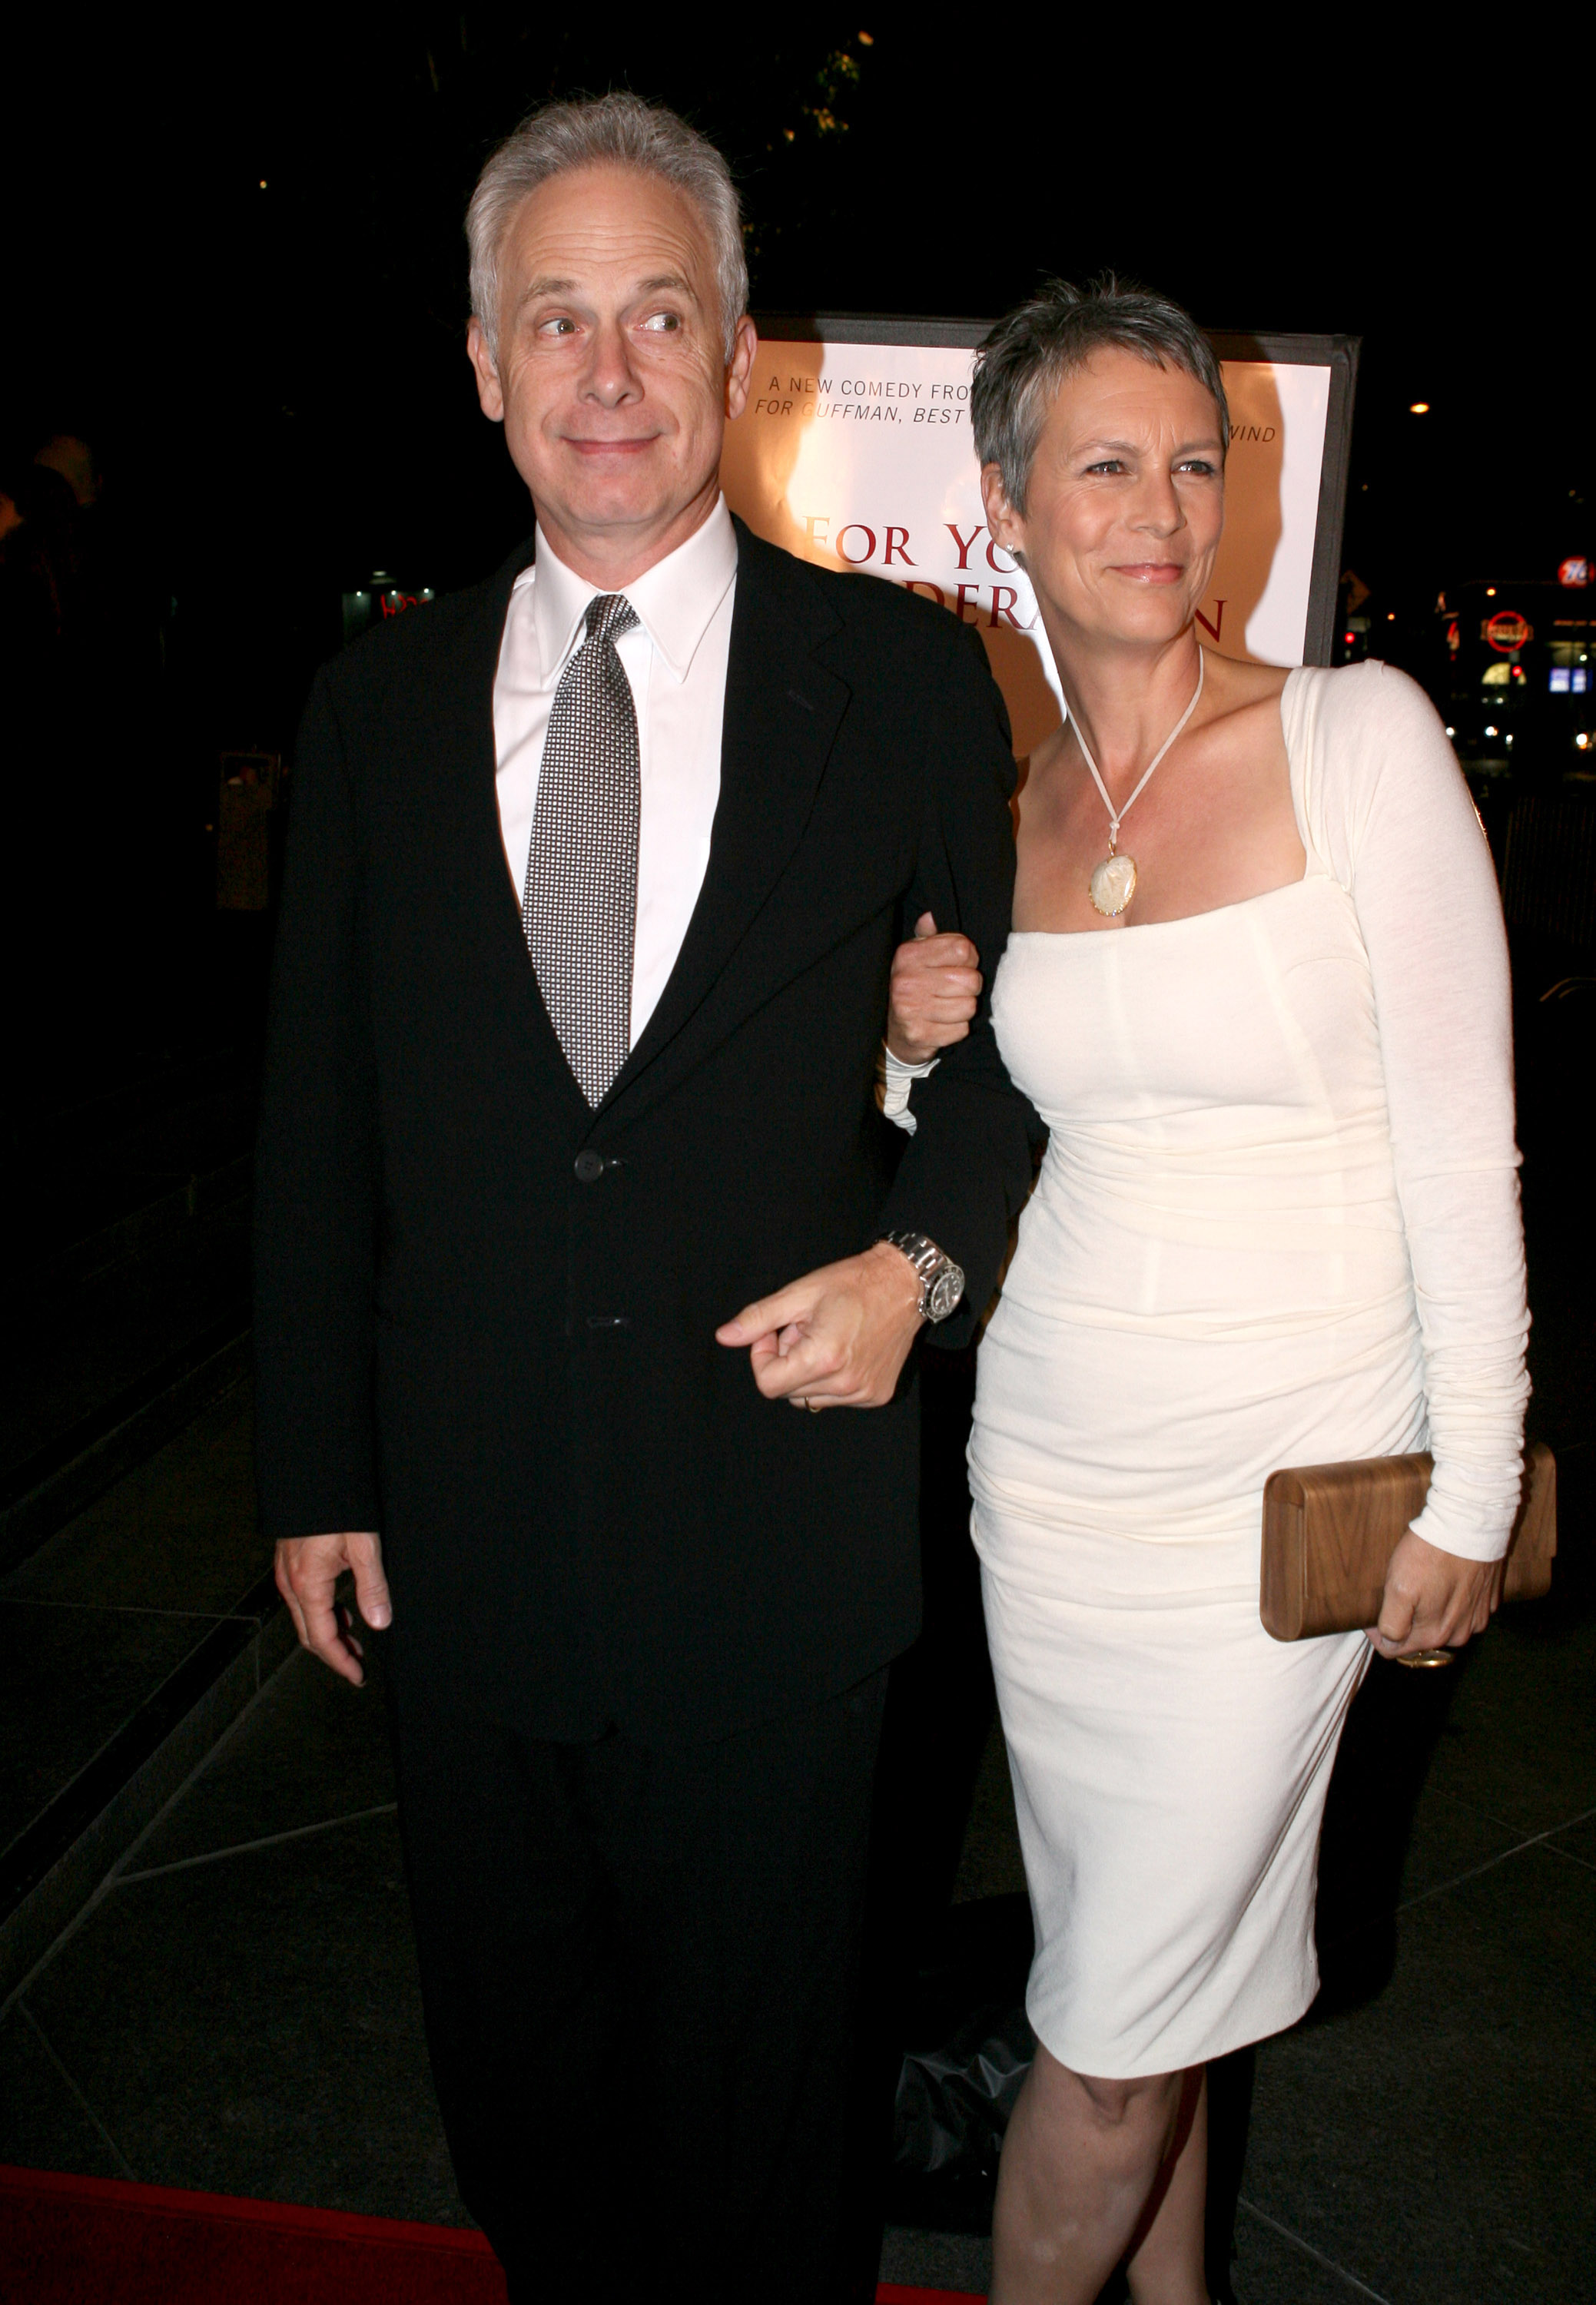 Christopher Guest and Jamie Lee Curtis during "For Your Consideration" Los Angeles Premiere - Arrivals at Director's Guild of America in Beverly Hills, California on November 13, 2006. | Source: Getty Images